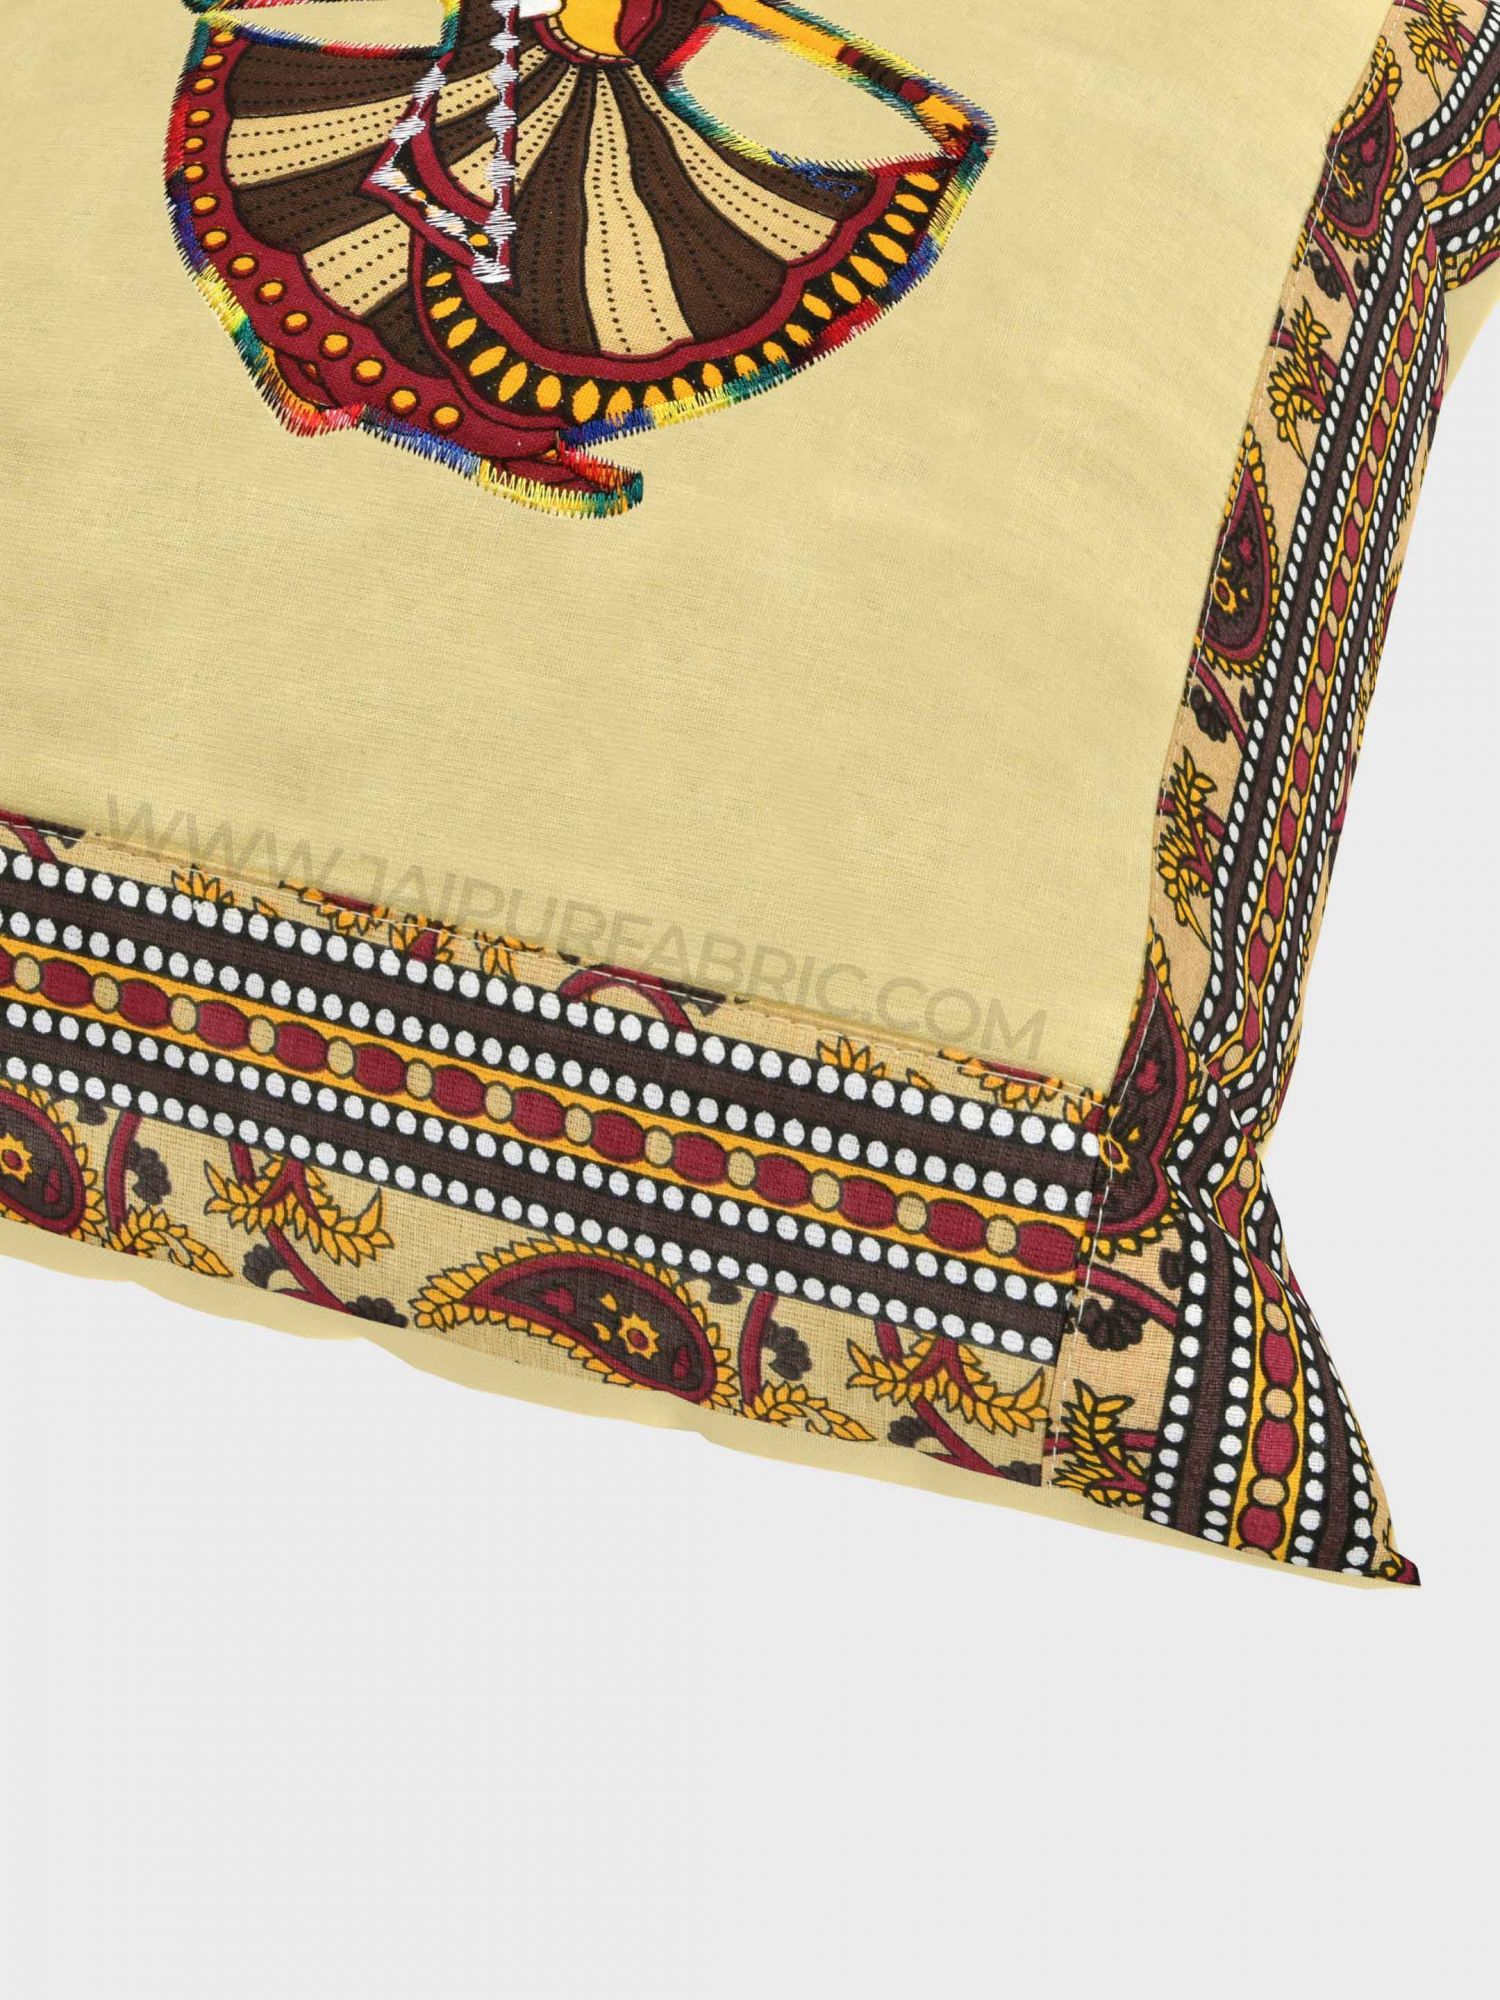 Applique Cream Gujri Jaipuri Hand Made Embroidery Patch Work Cushion Cover